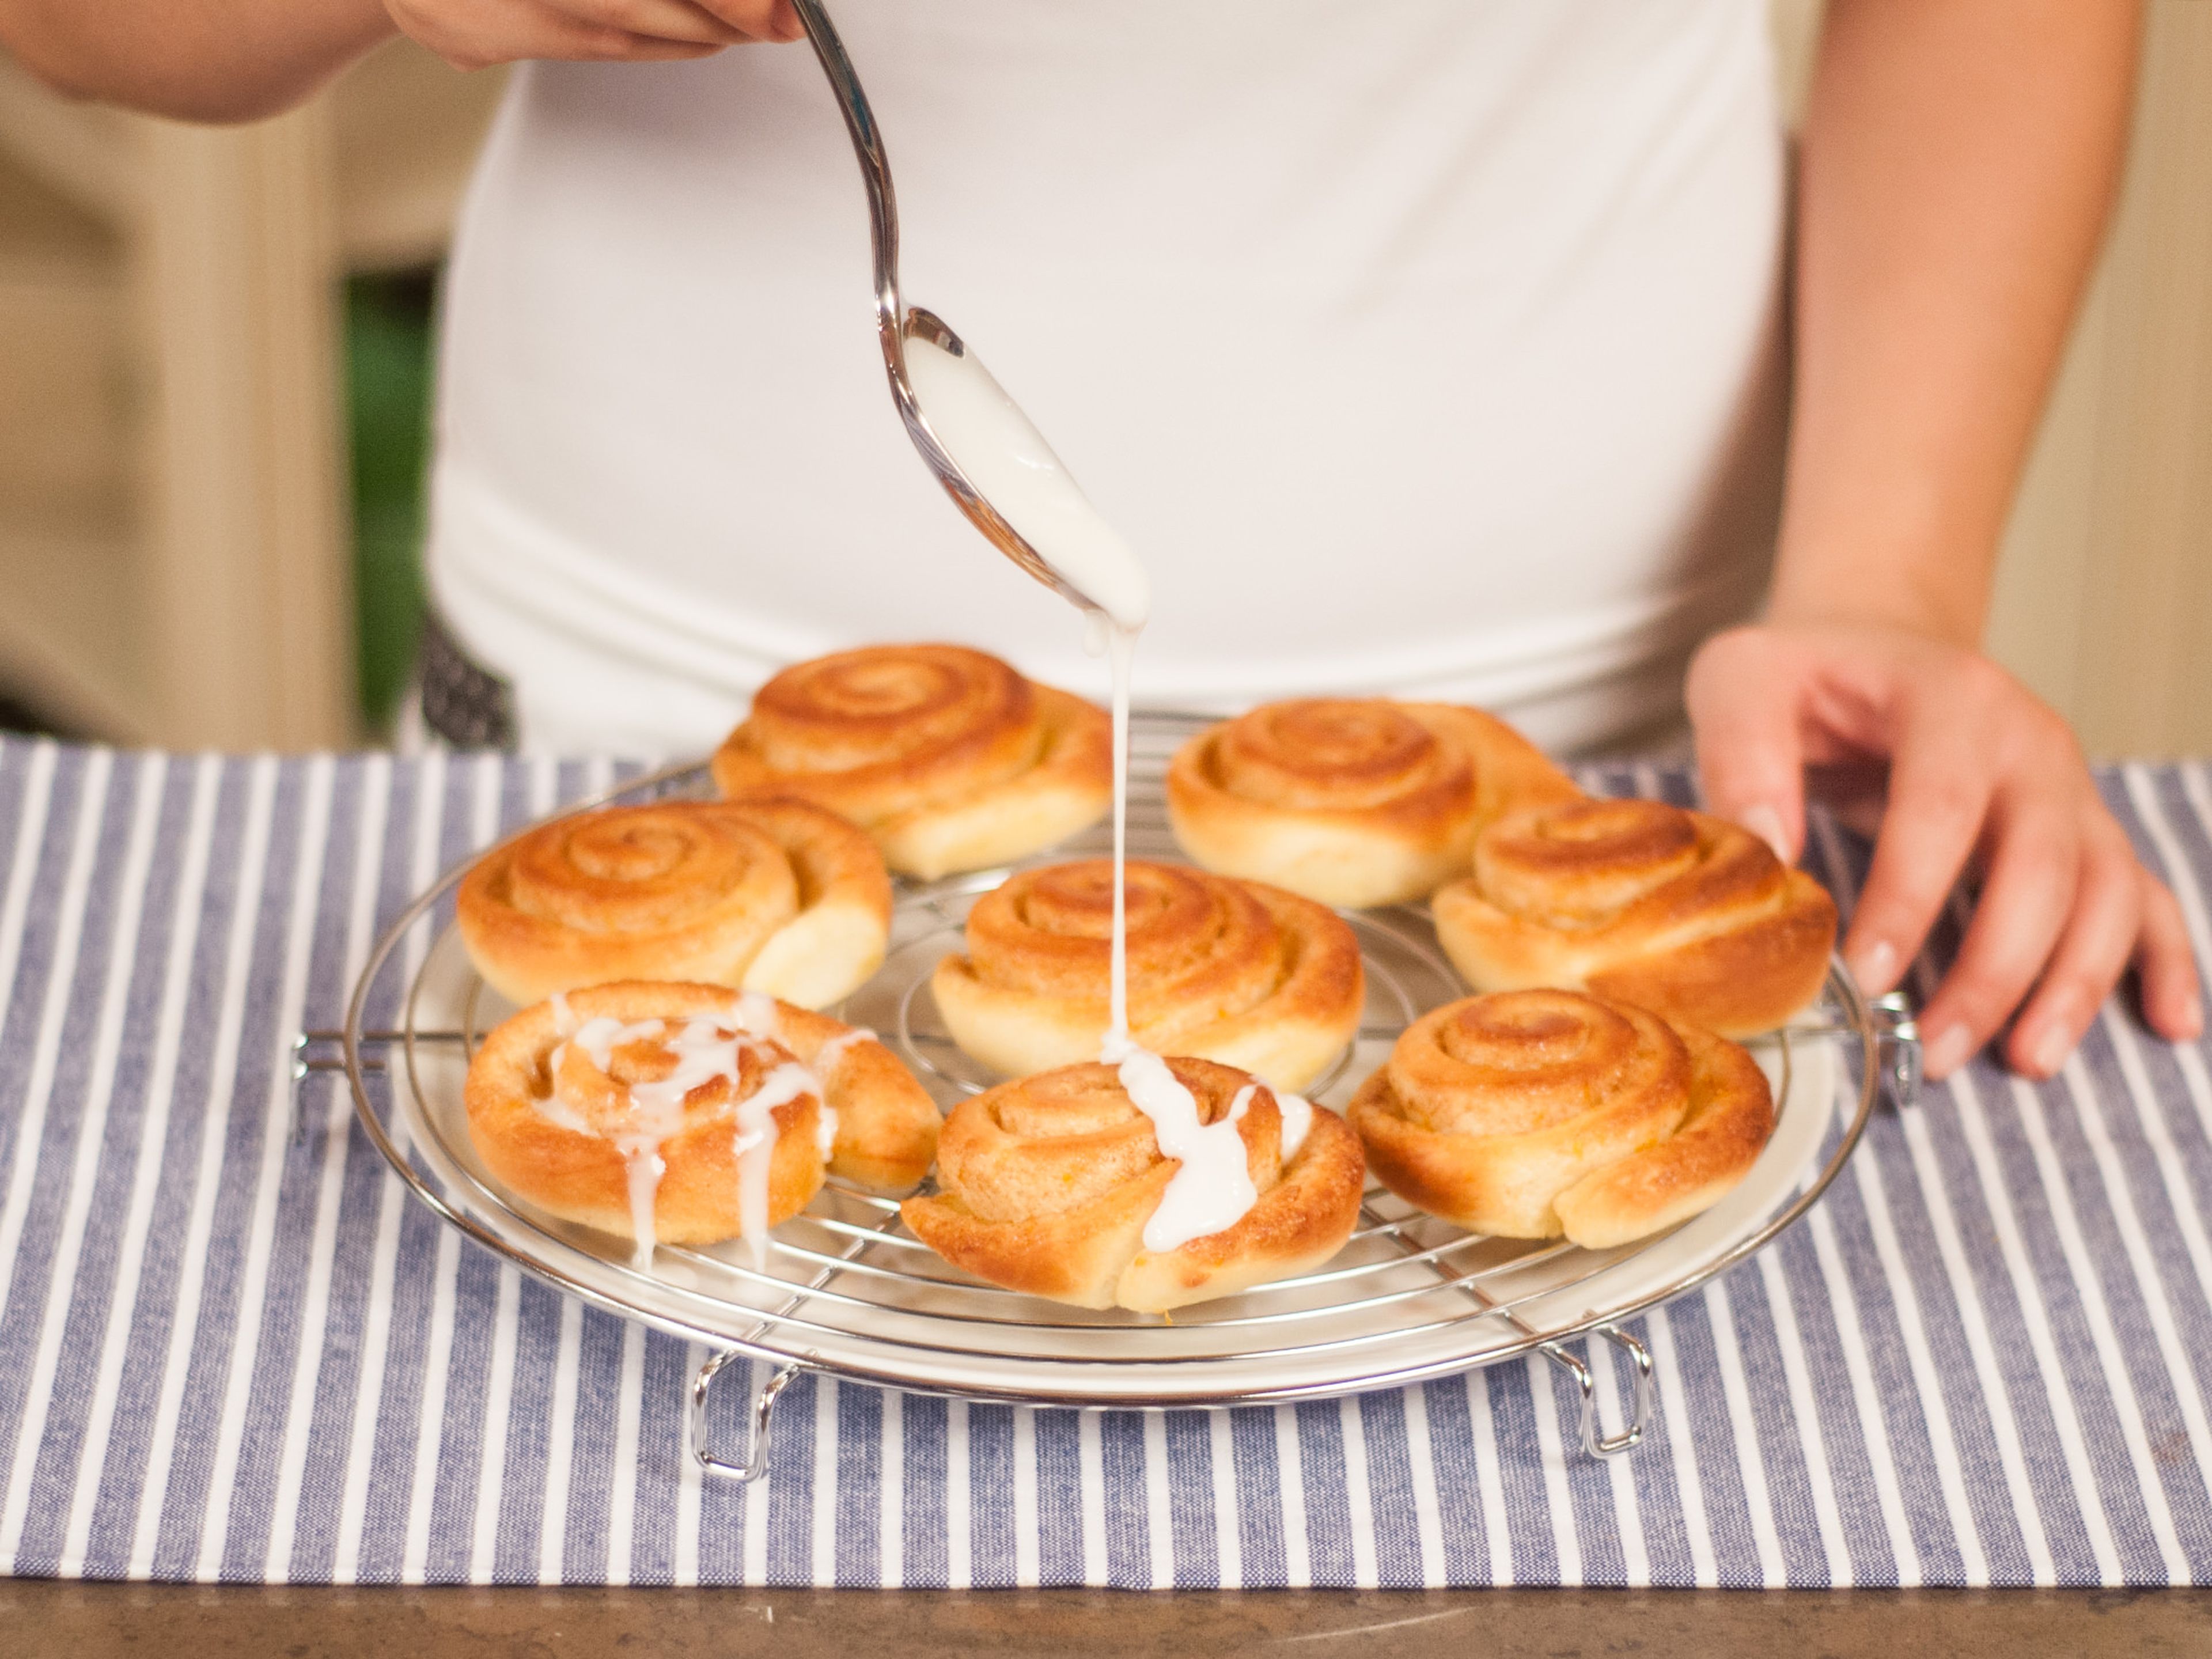 Take the rolls out of the oven and let cool for 10 min. on a rack. Drizzle the icing over the rolls and decorate to your preference. Serve while still warm.